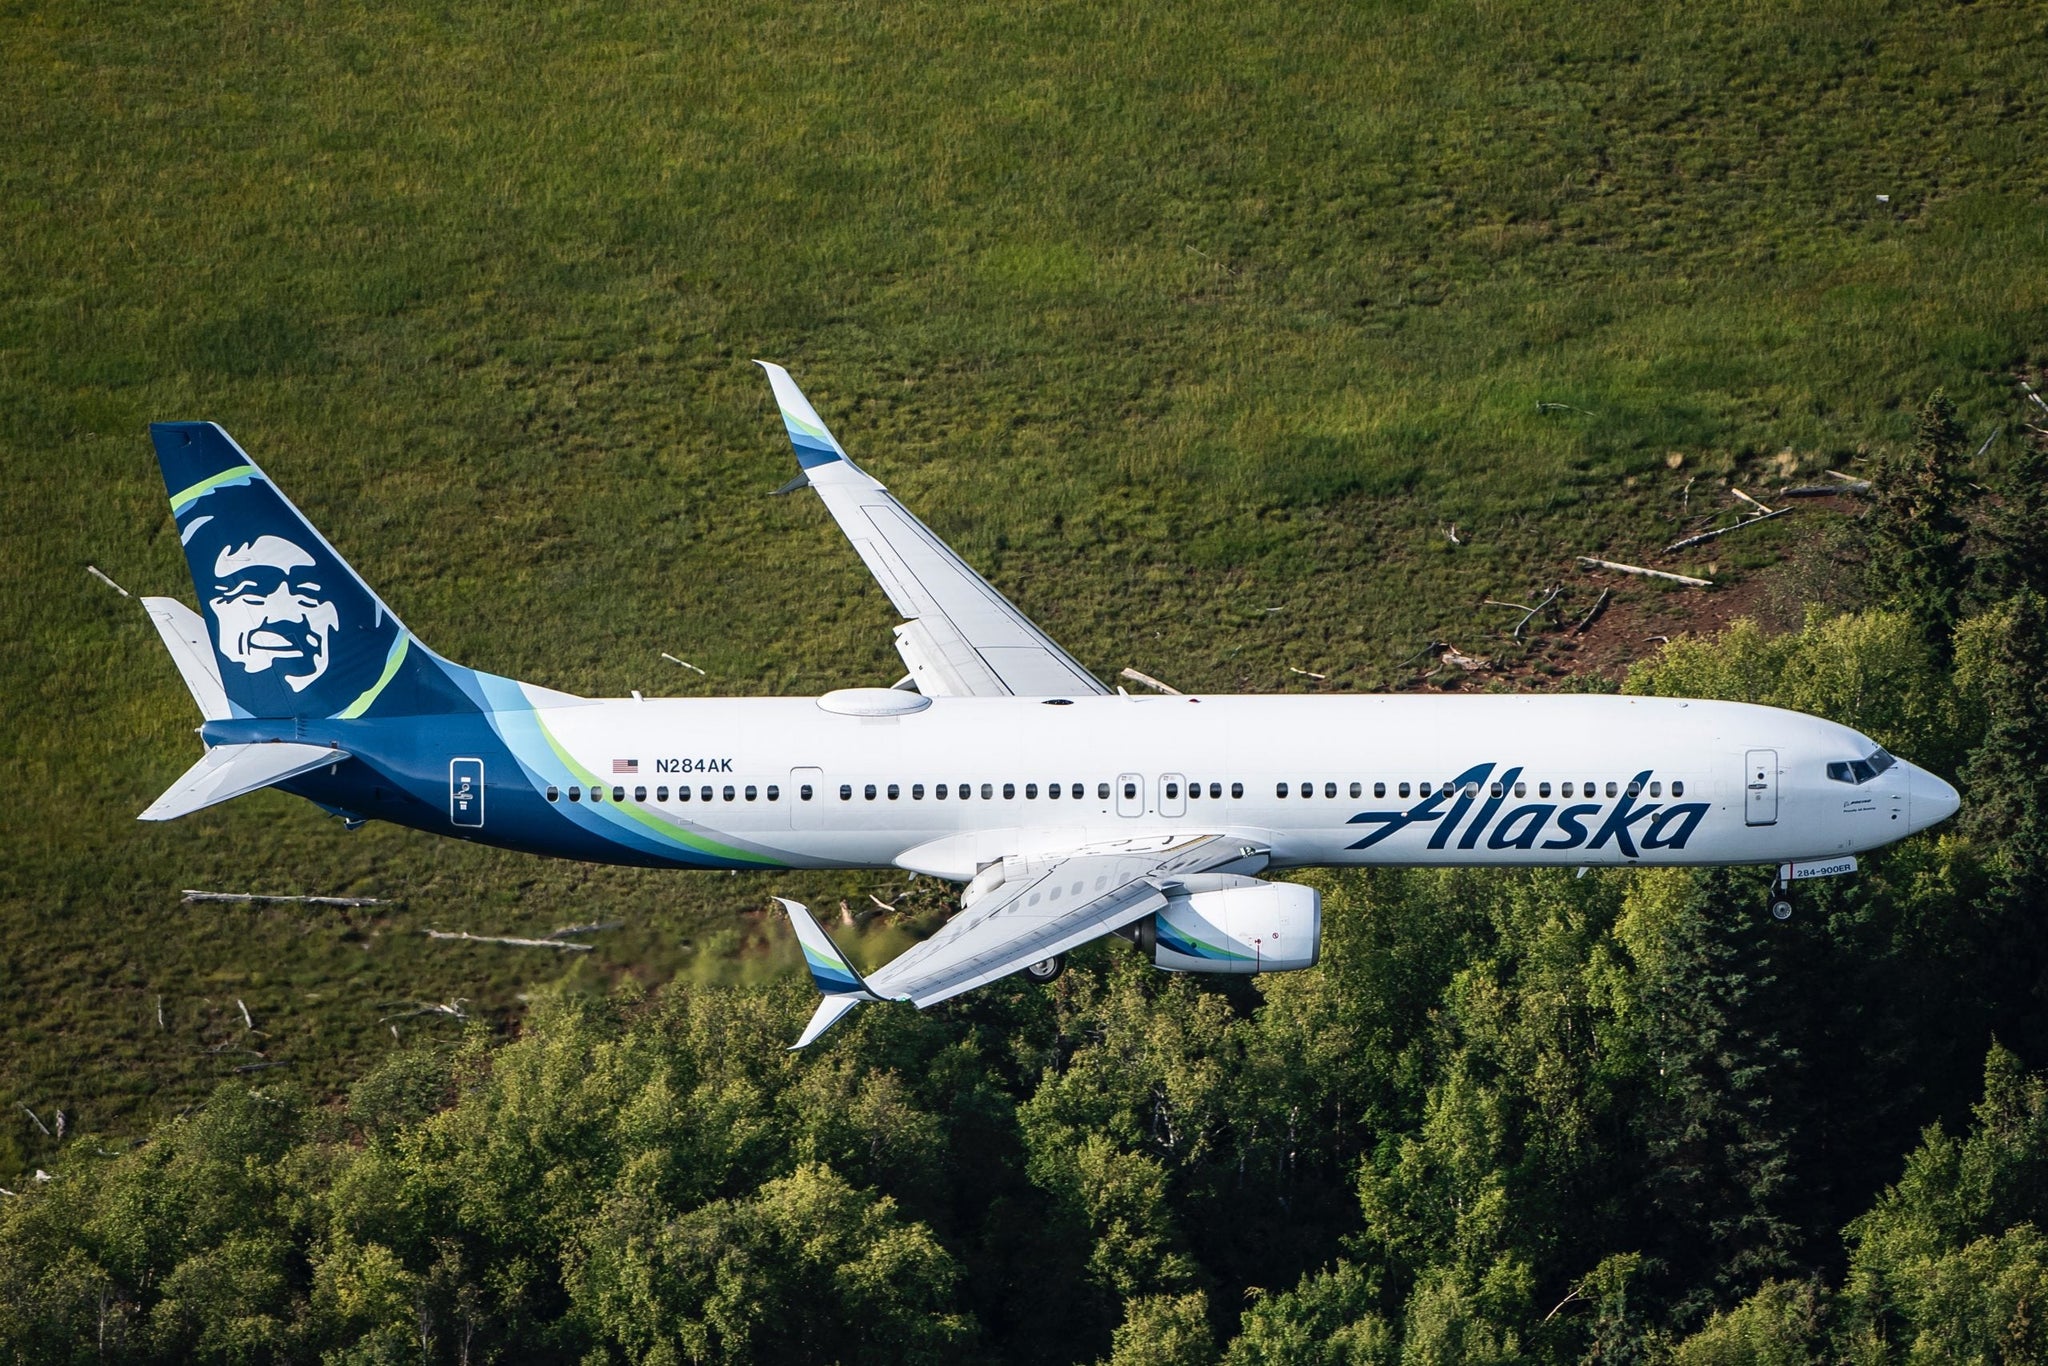 Fresh fare, full beverage service: Alaska Airlines further expands food and drink offerings for passenger